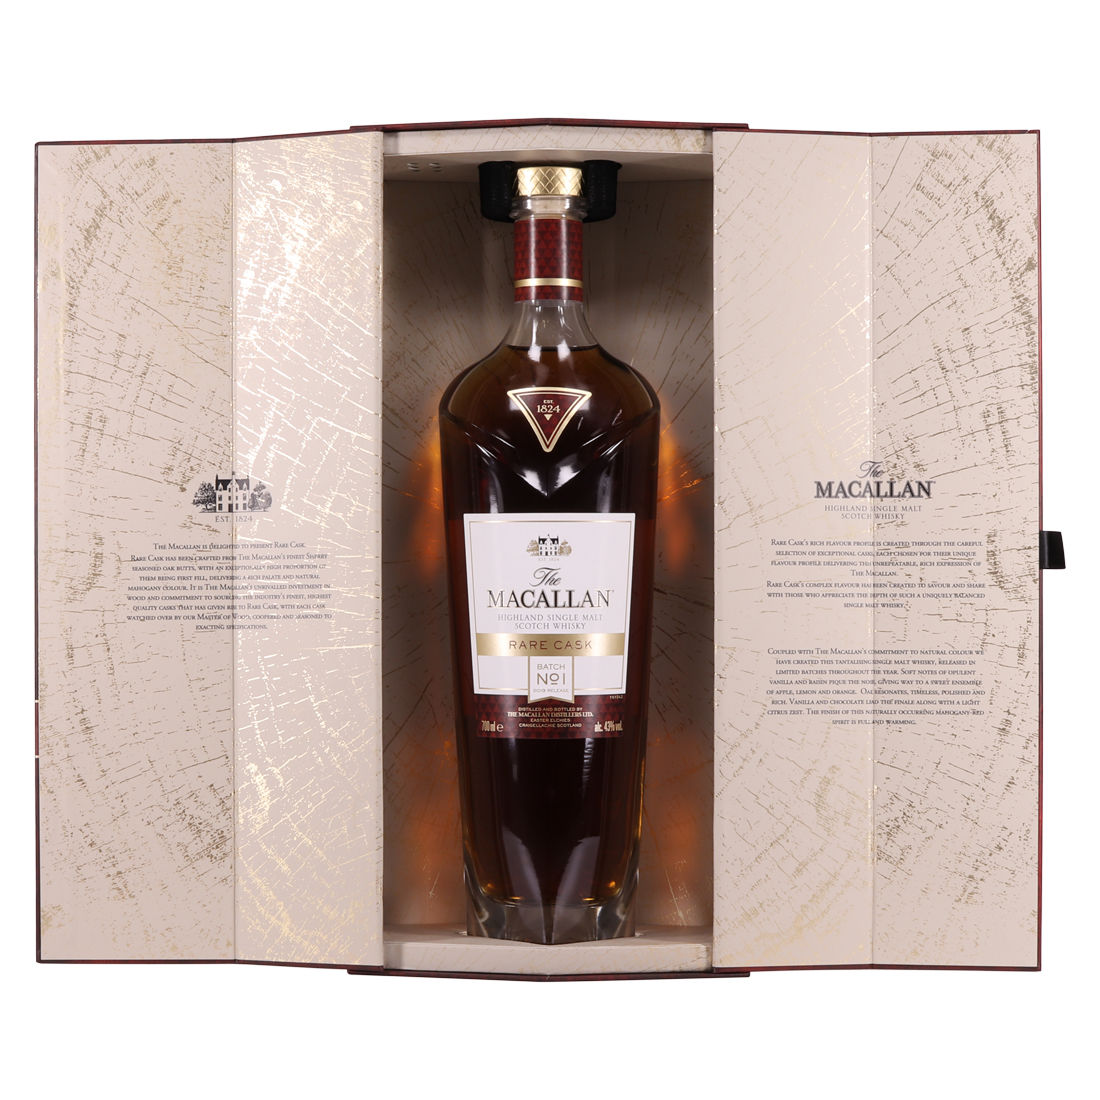 Macallan Rare Cask No 1 2019 Auction The Grand Whisky Auction